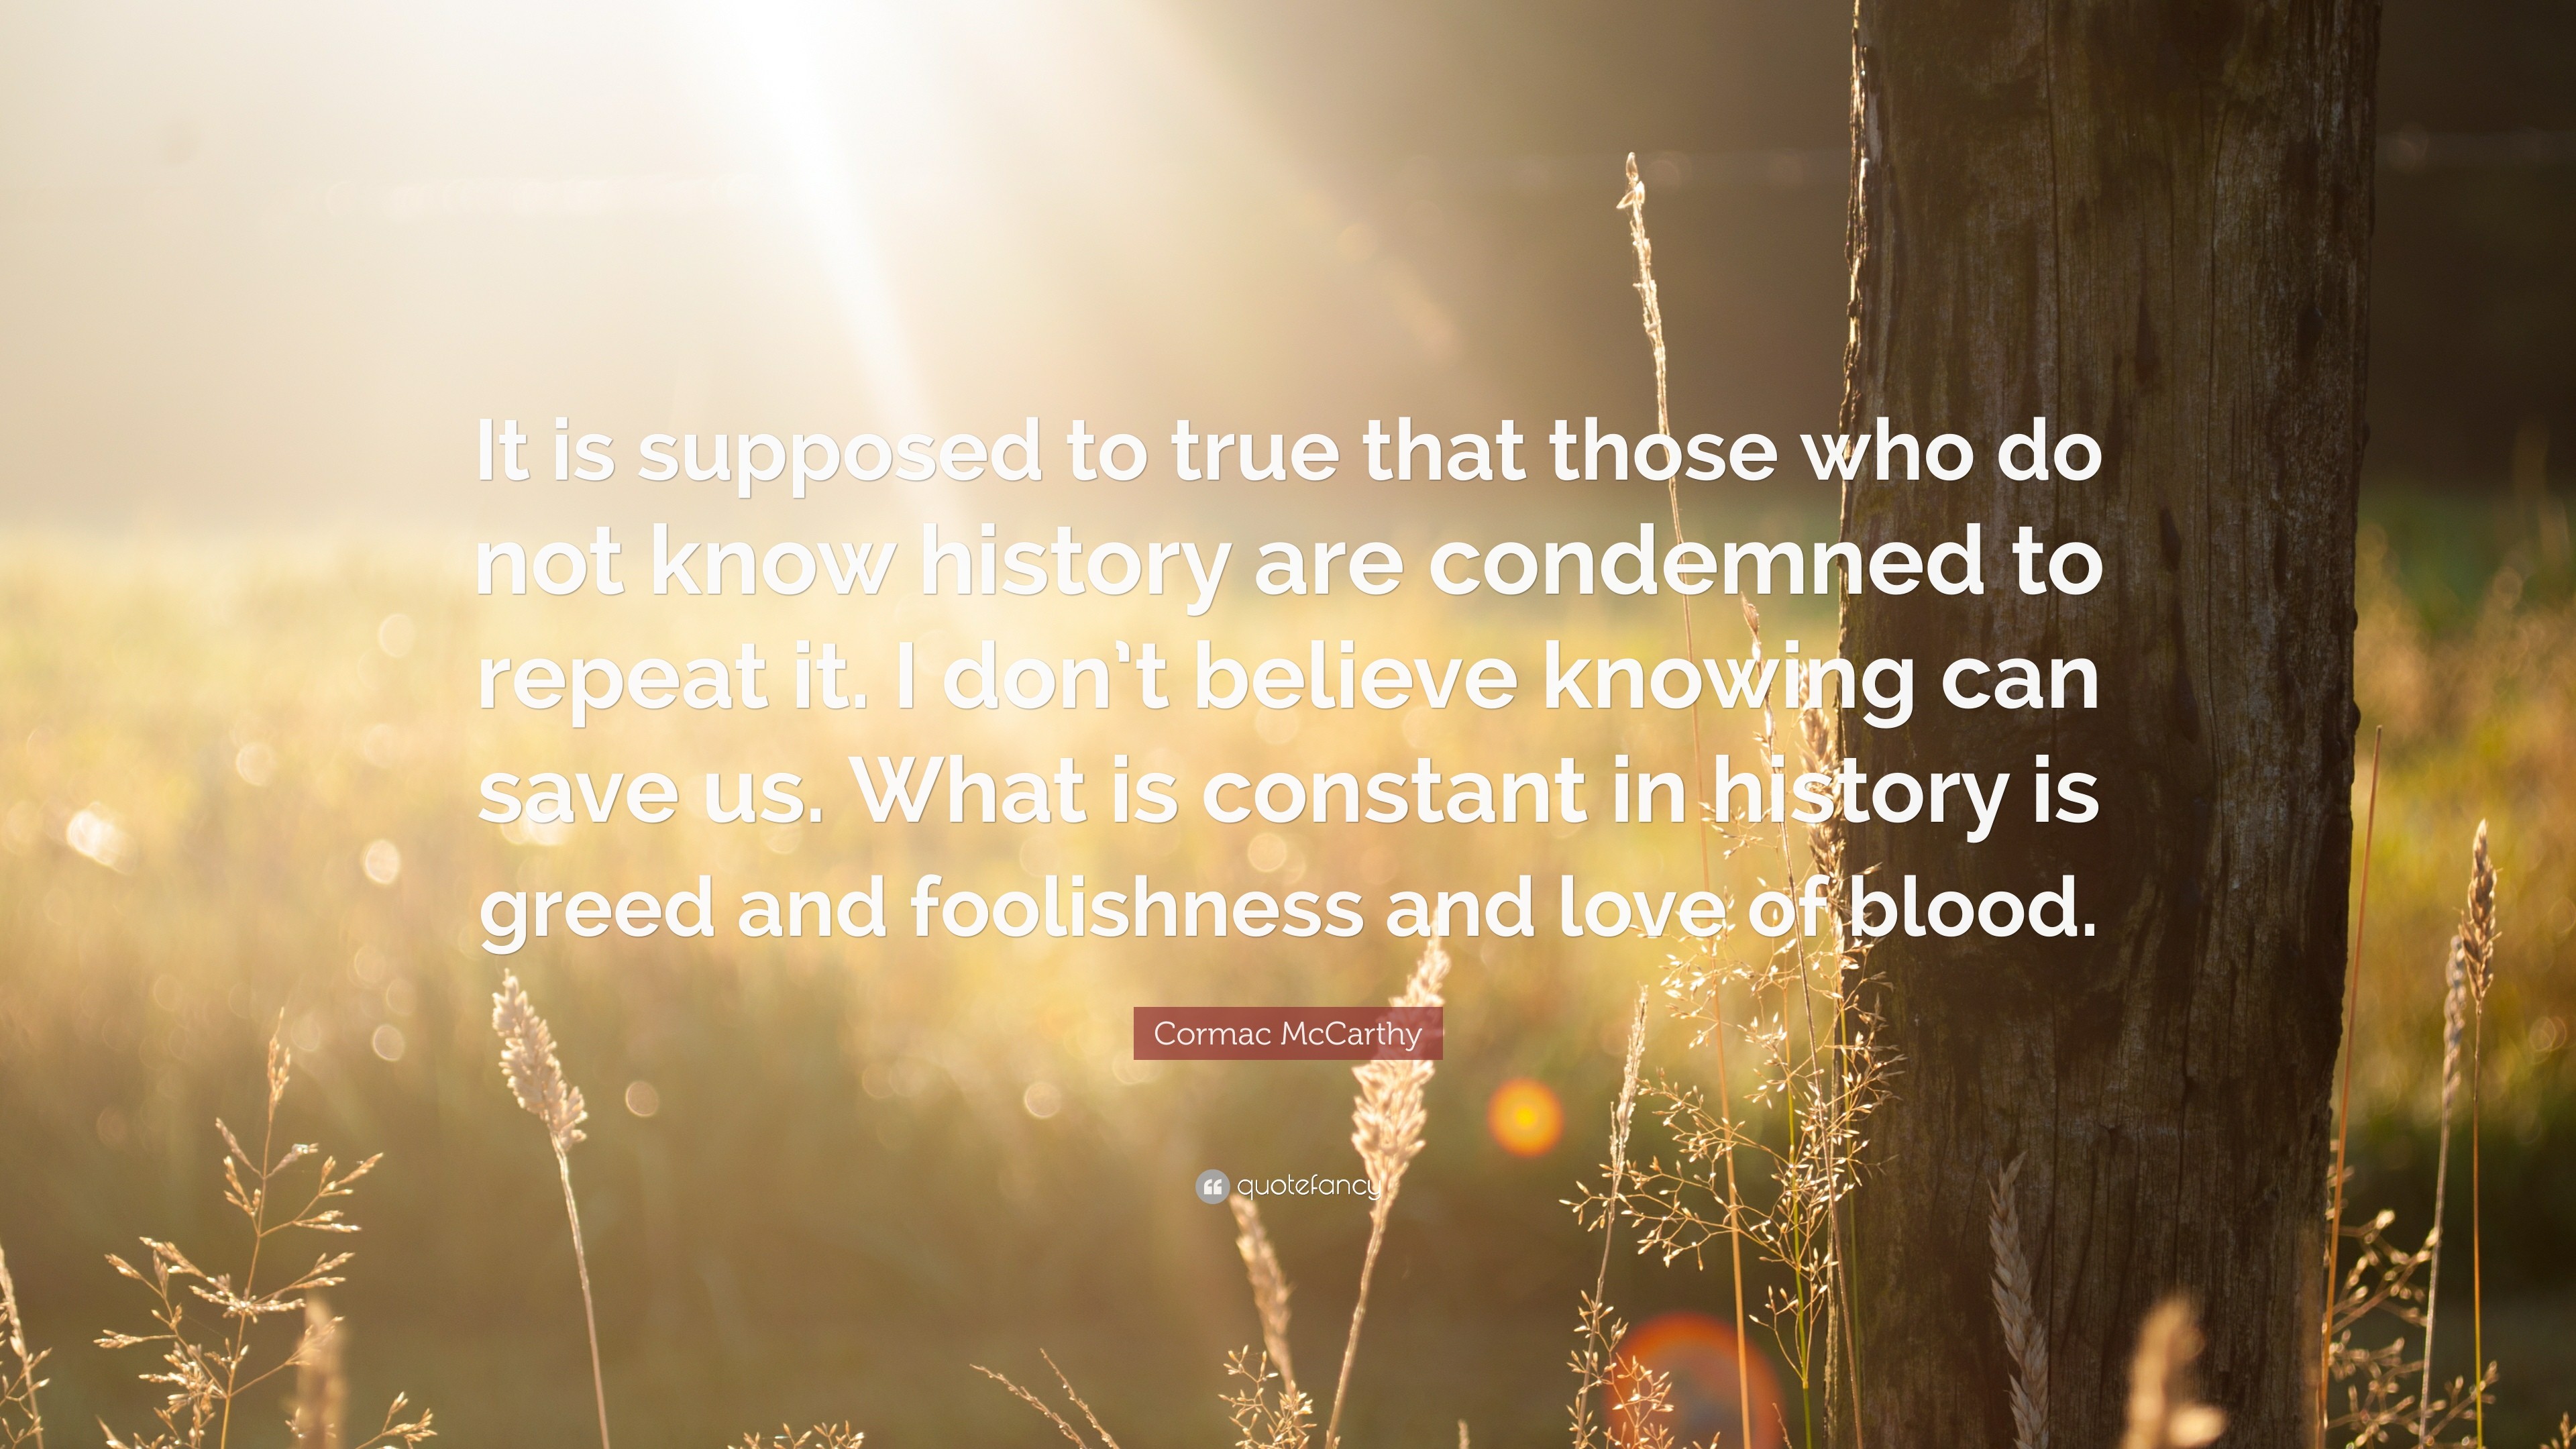 3840x2160 Cormac McCarthy Quote: “It is supposed to true that those who do not know